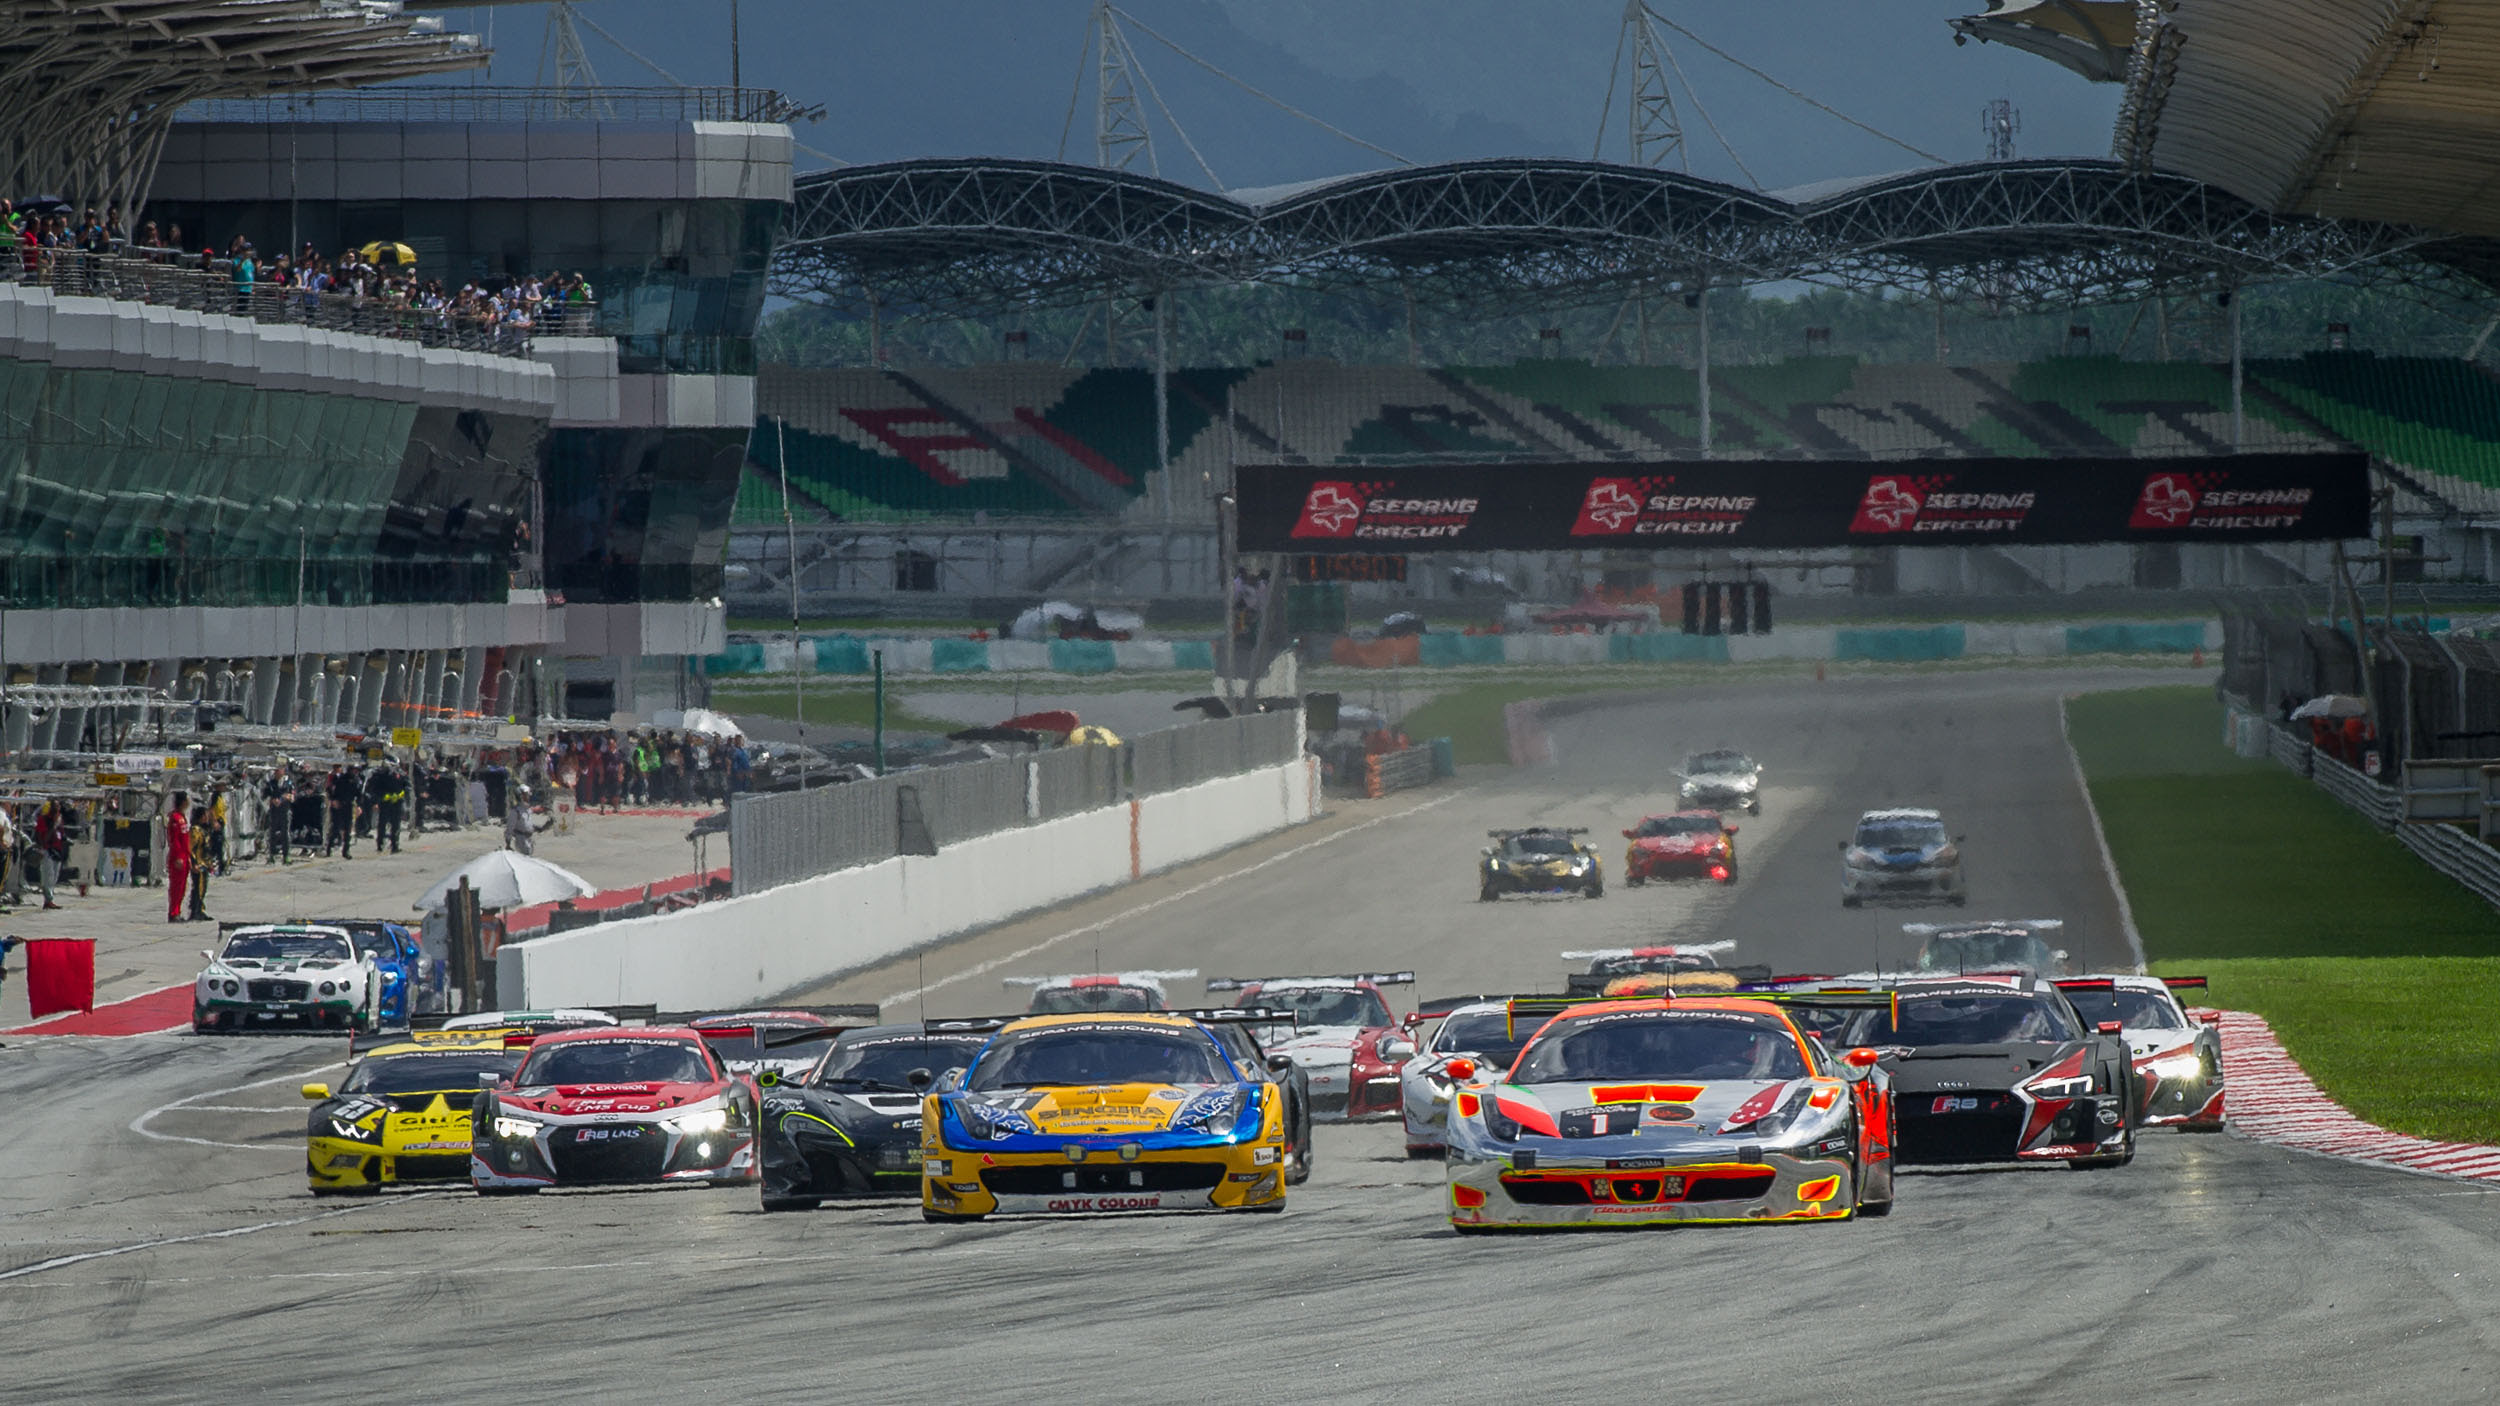 Since 2015, the endurance race near the Malaysian capital of Kuala Lumpur is a joint organisation between the SRO Motorsports Group and Sepang International Circuit.